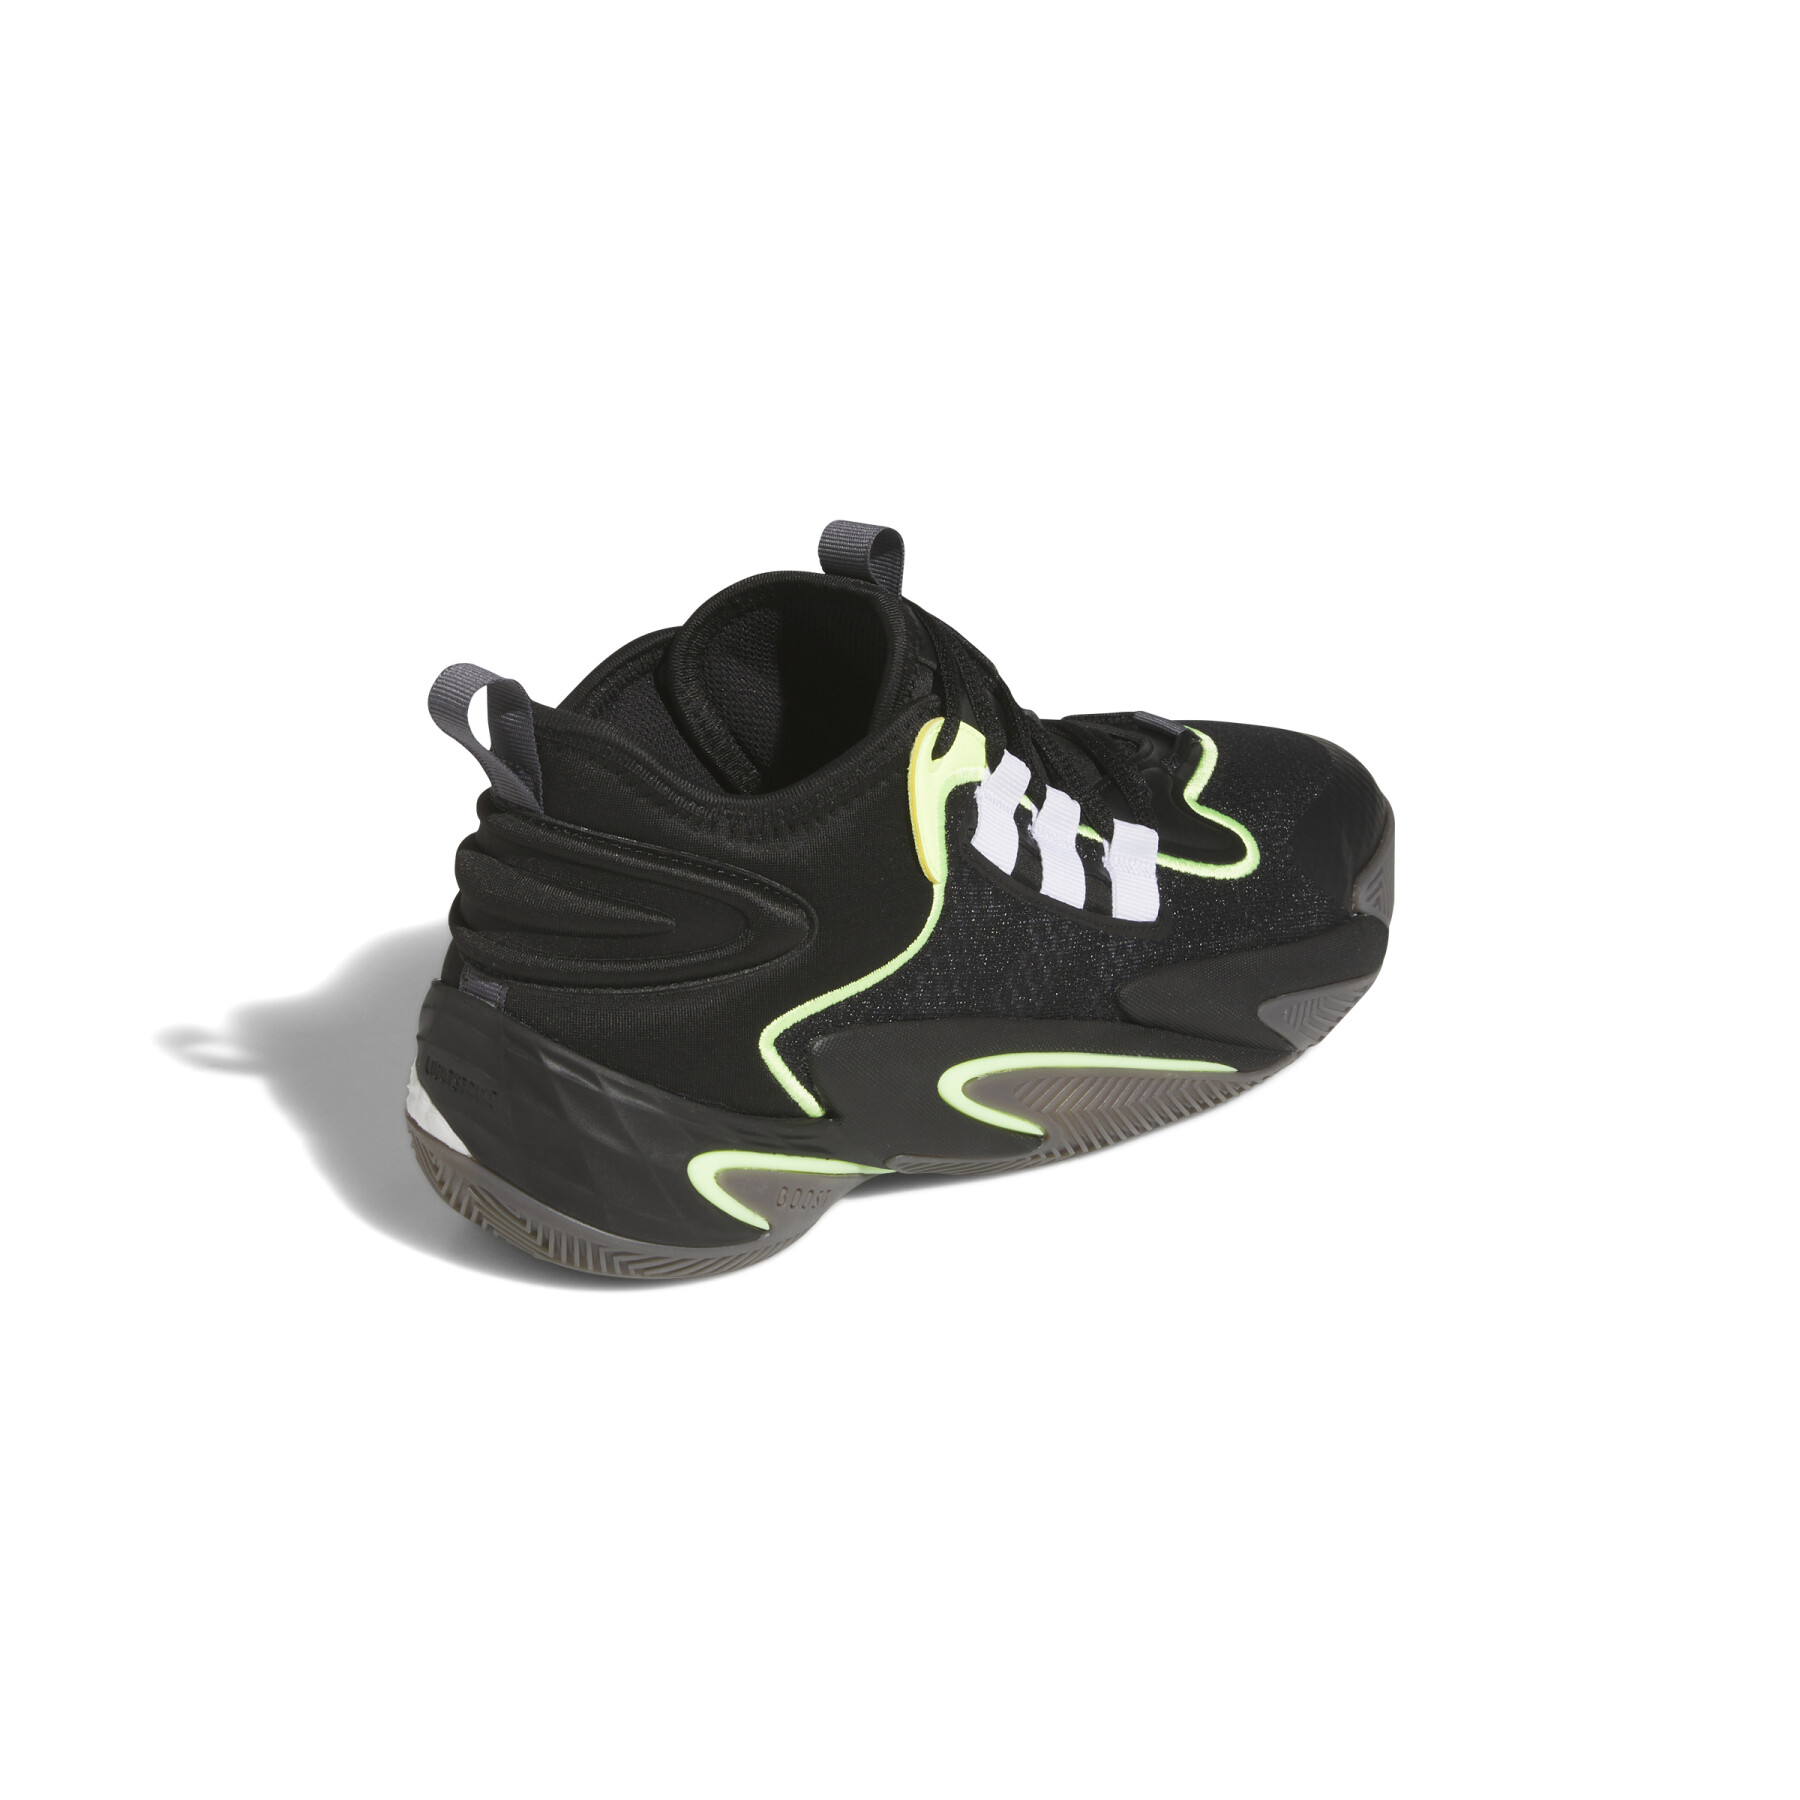 Hallenschuhe adidas Byw Select